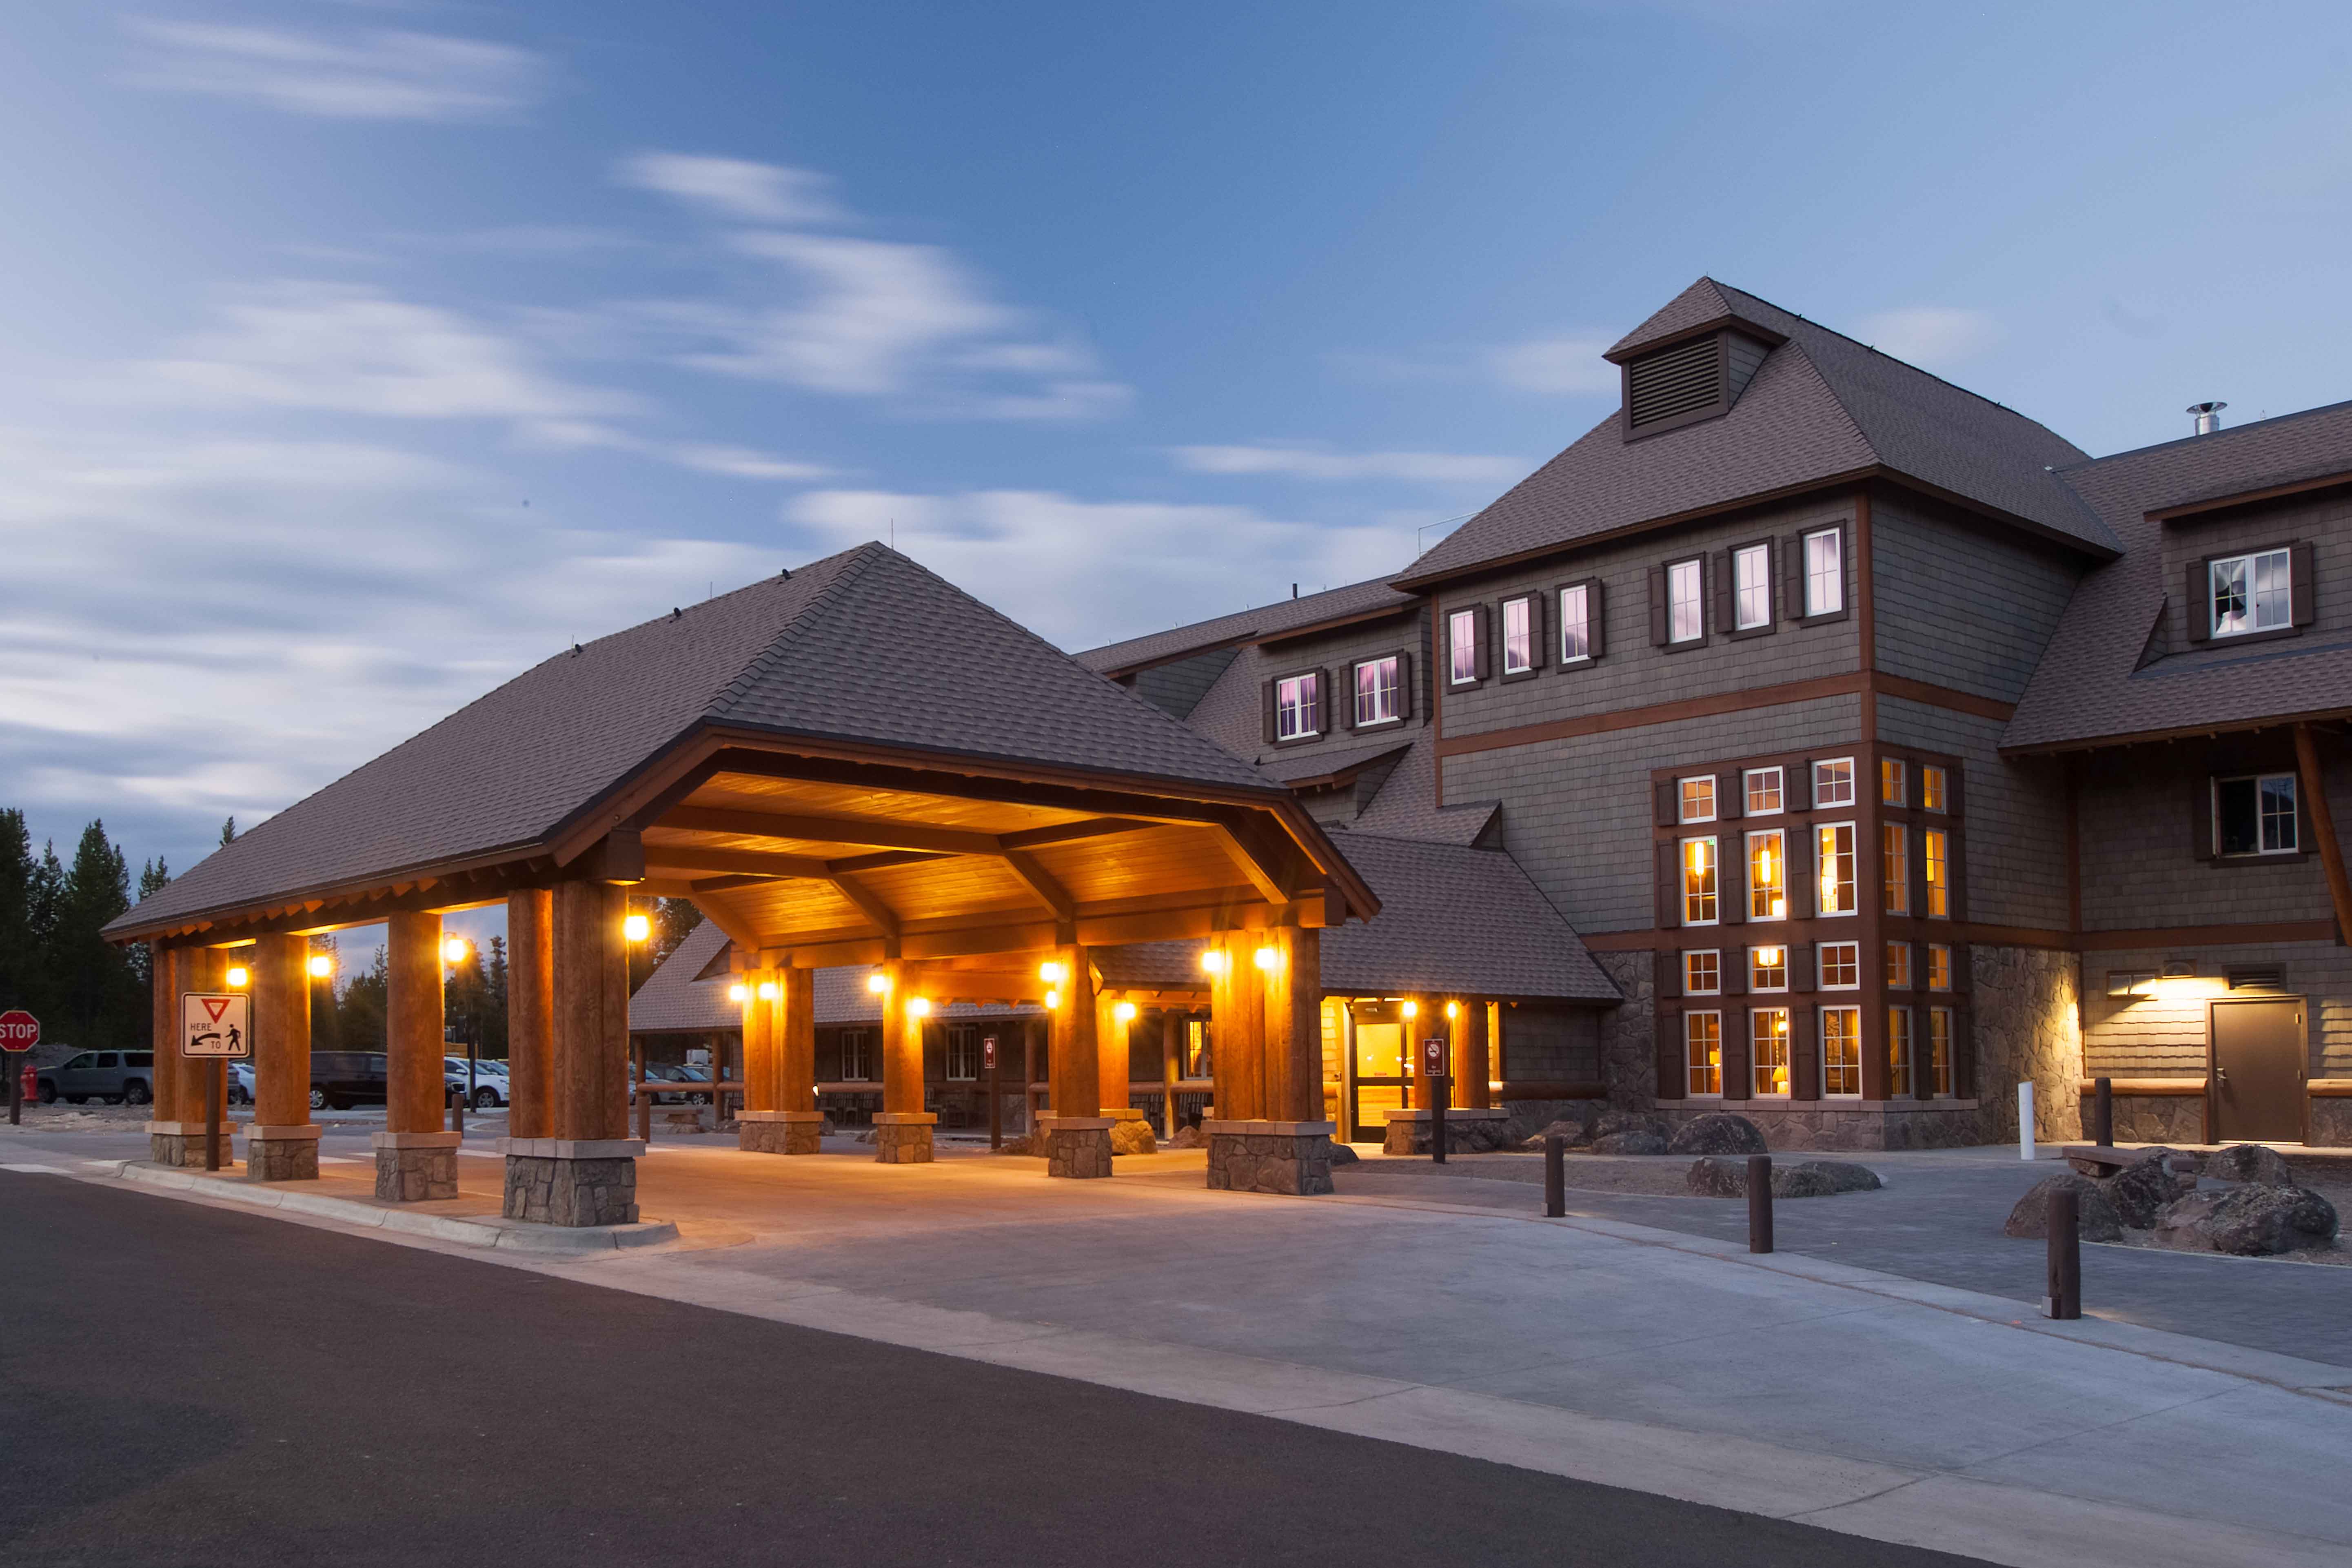 yellowstone national park tours hotels